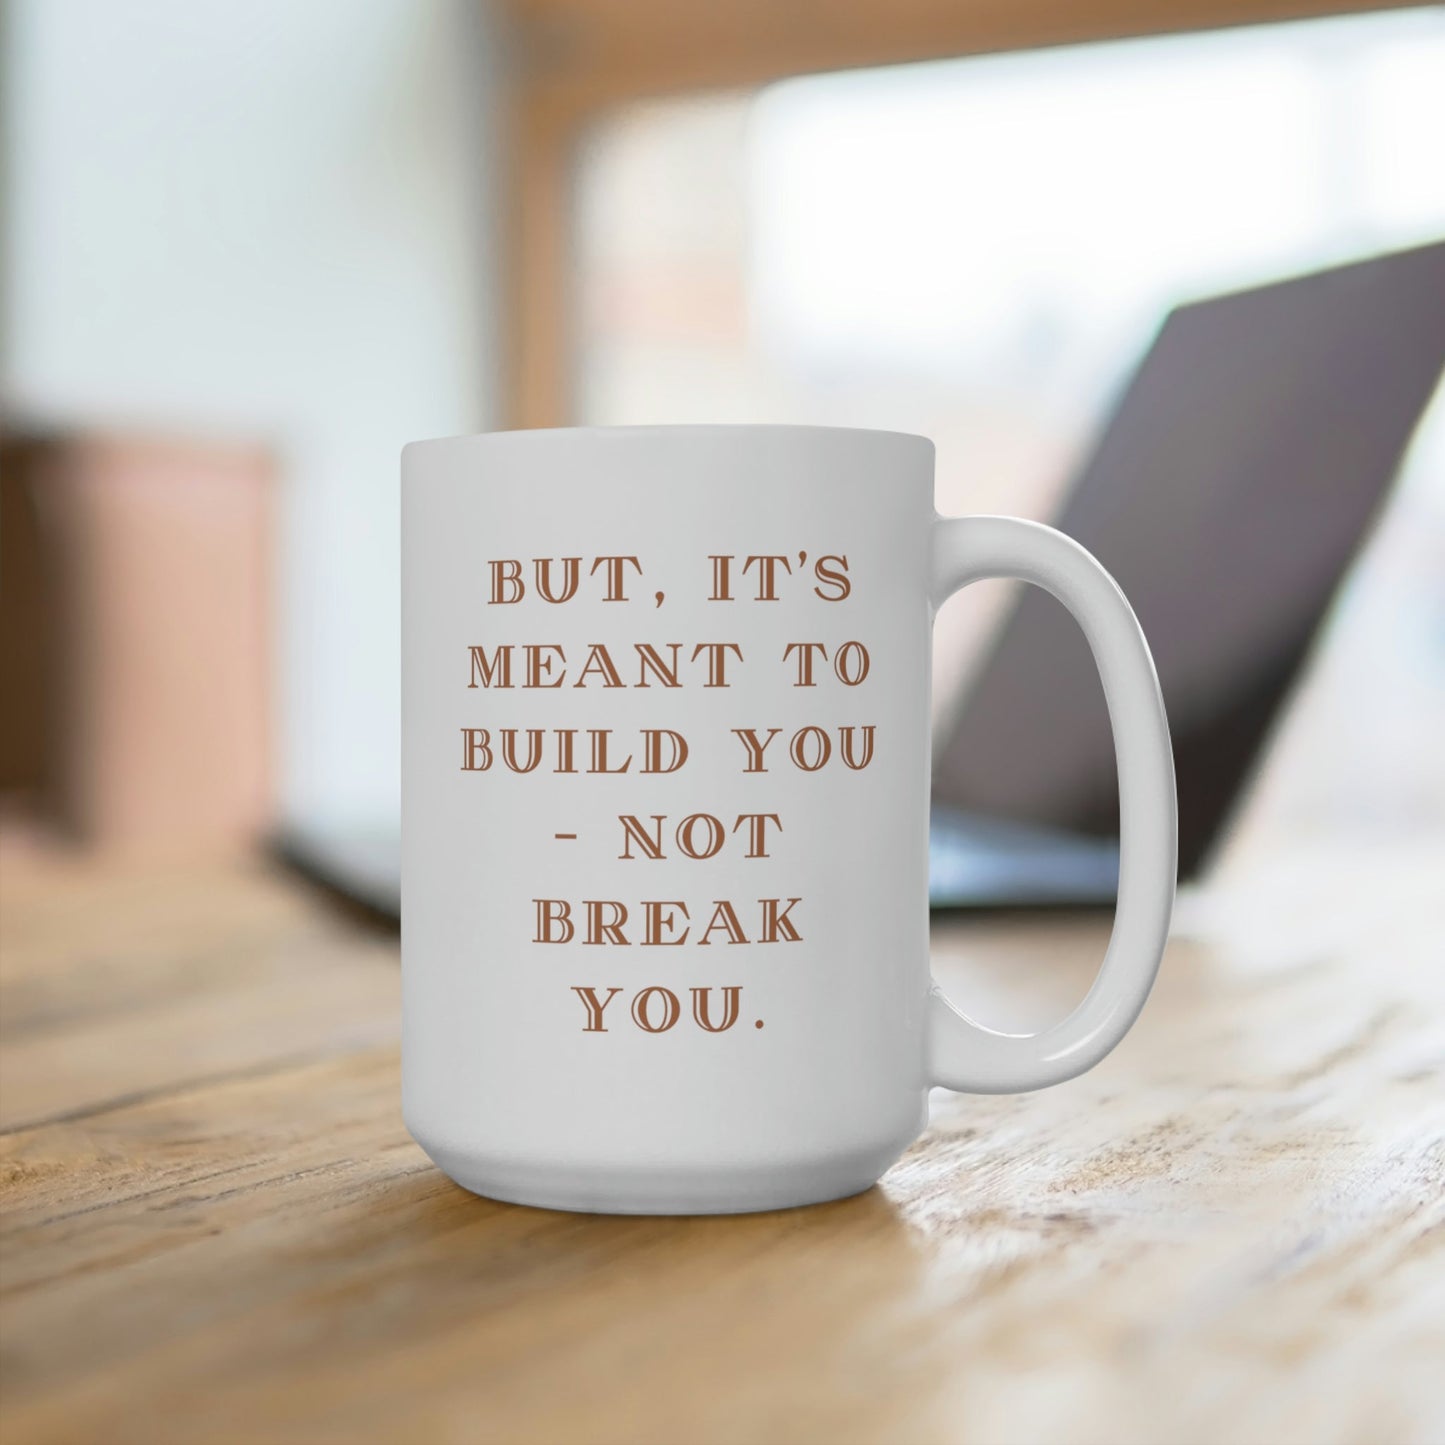 White Ceramic Mug, Accent Mug, Inspirational, Available in Two Sizes and Styles